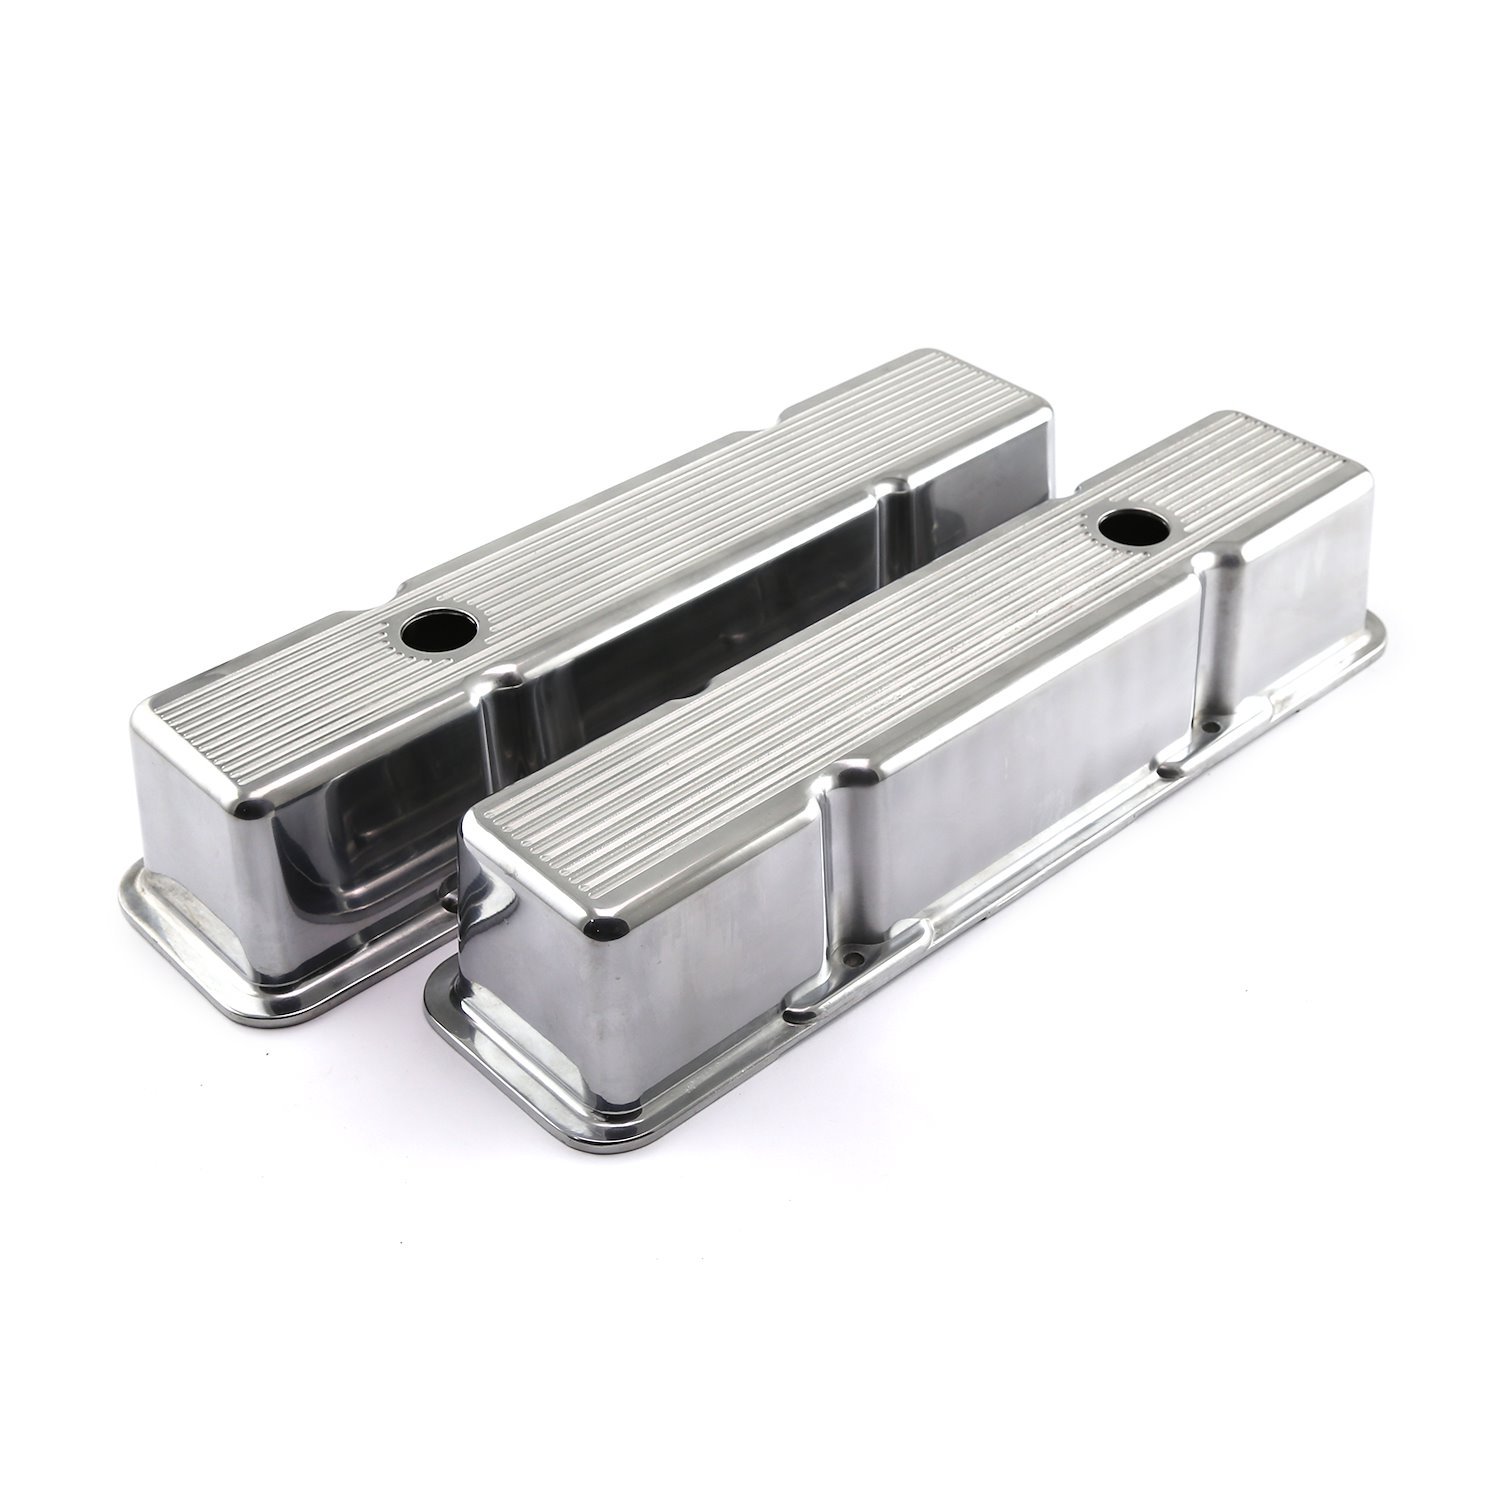 Aluminum Valve Covers Small Block Chevy 350 [Polished]